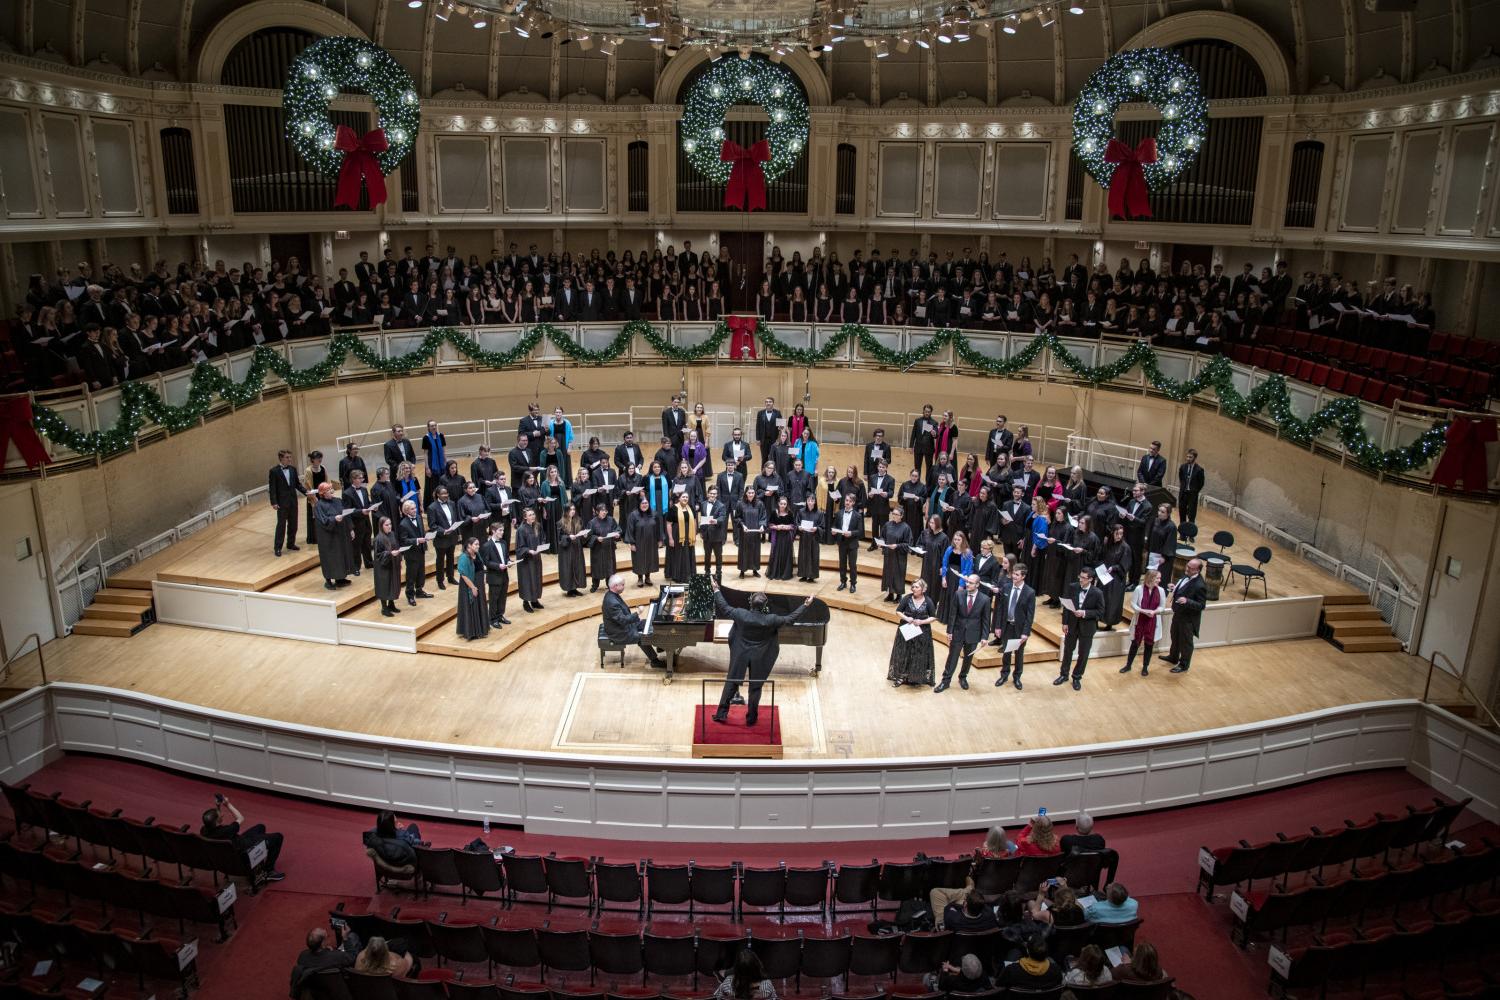 The <a href='http://gk46.lcxjj.net'>bv伟德ios下载</a> Choir performs in the Chicago Symphony Hall.